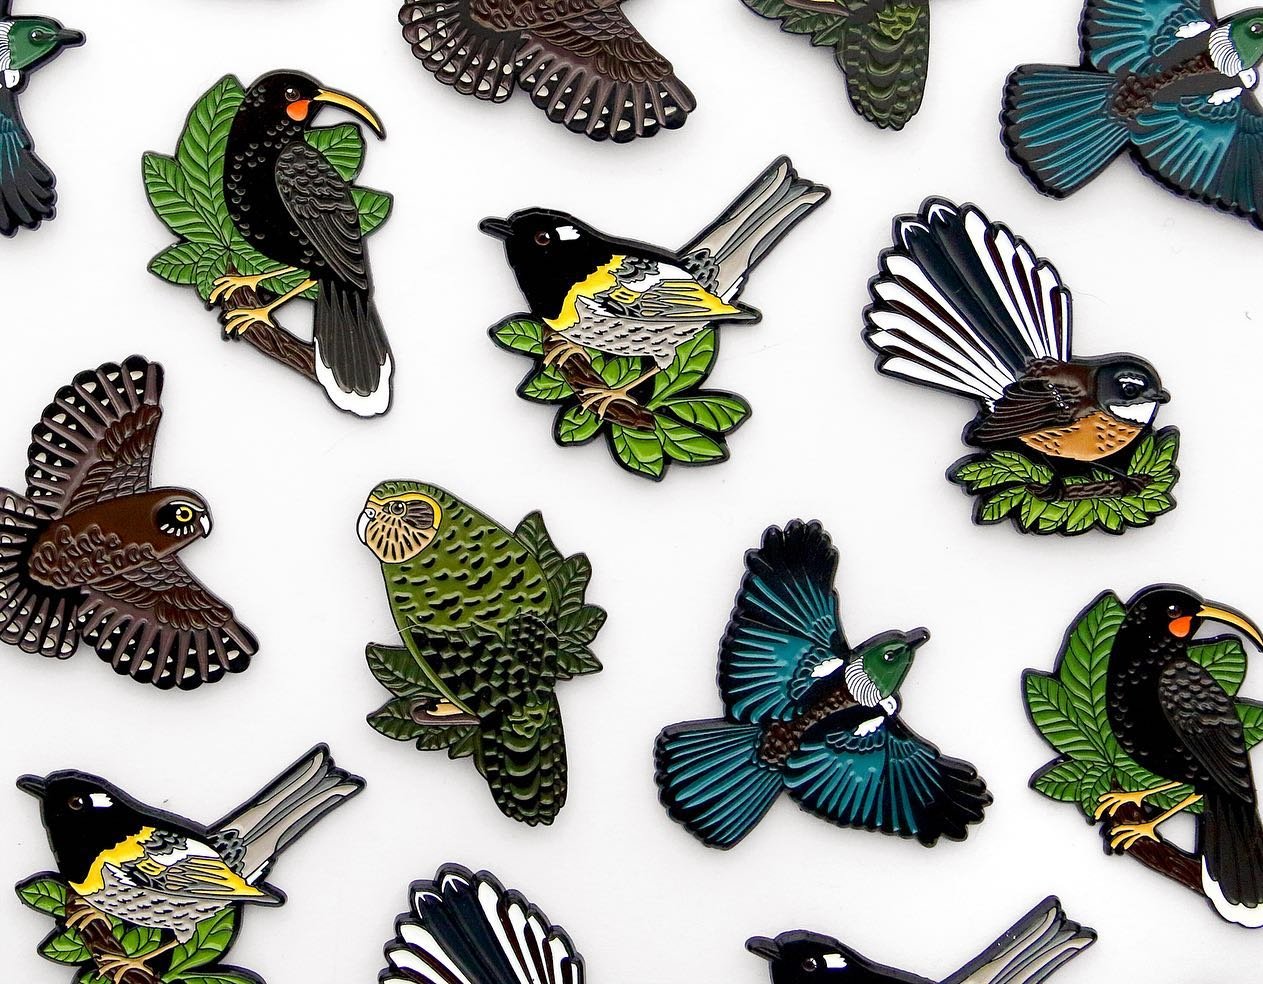 My native bird pin collection is growing, what bird should I add next?📍

I&rsquo;m really proud that my enamel pins are made by a certified B Corp who are committed to ethical manufacturing, transparency and positive social and environmental impact.